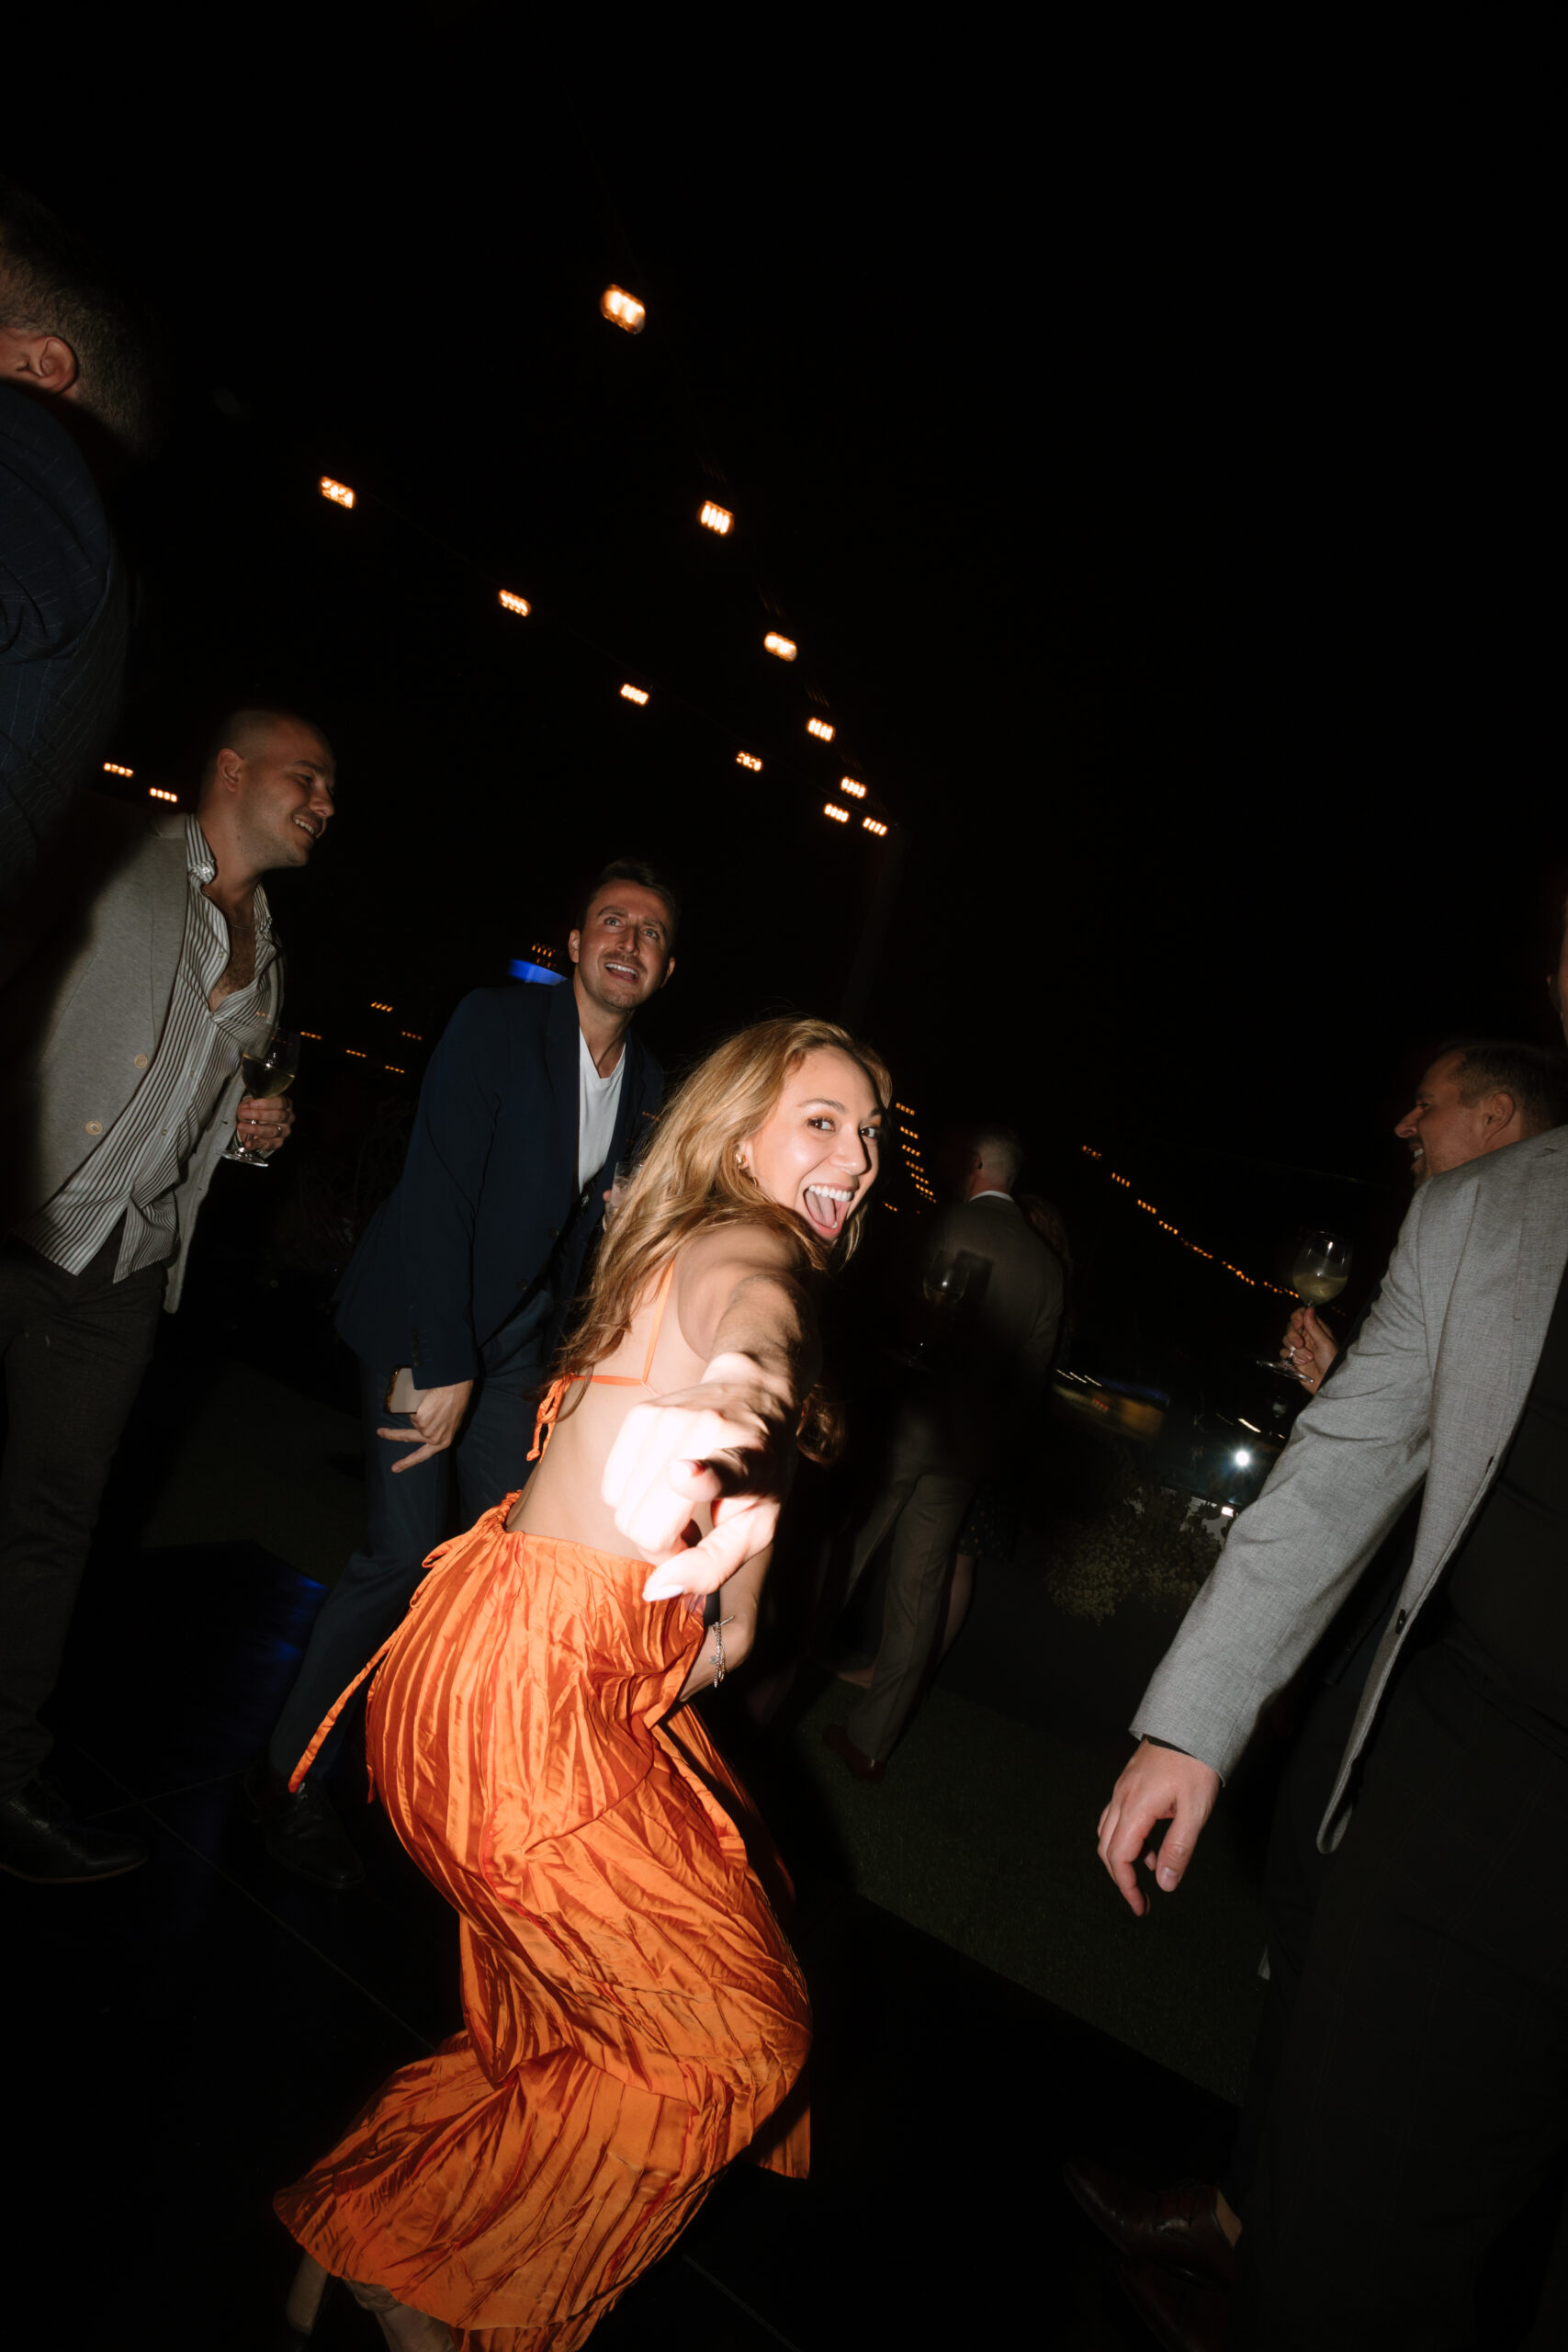 direct flash photo of wedding guest in orange dress dancing and pointing at the camera